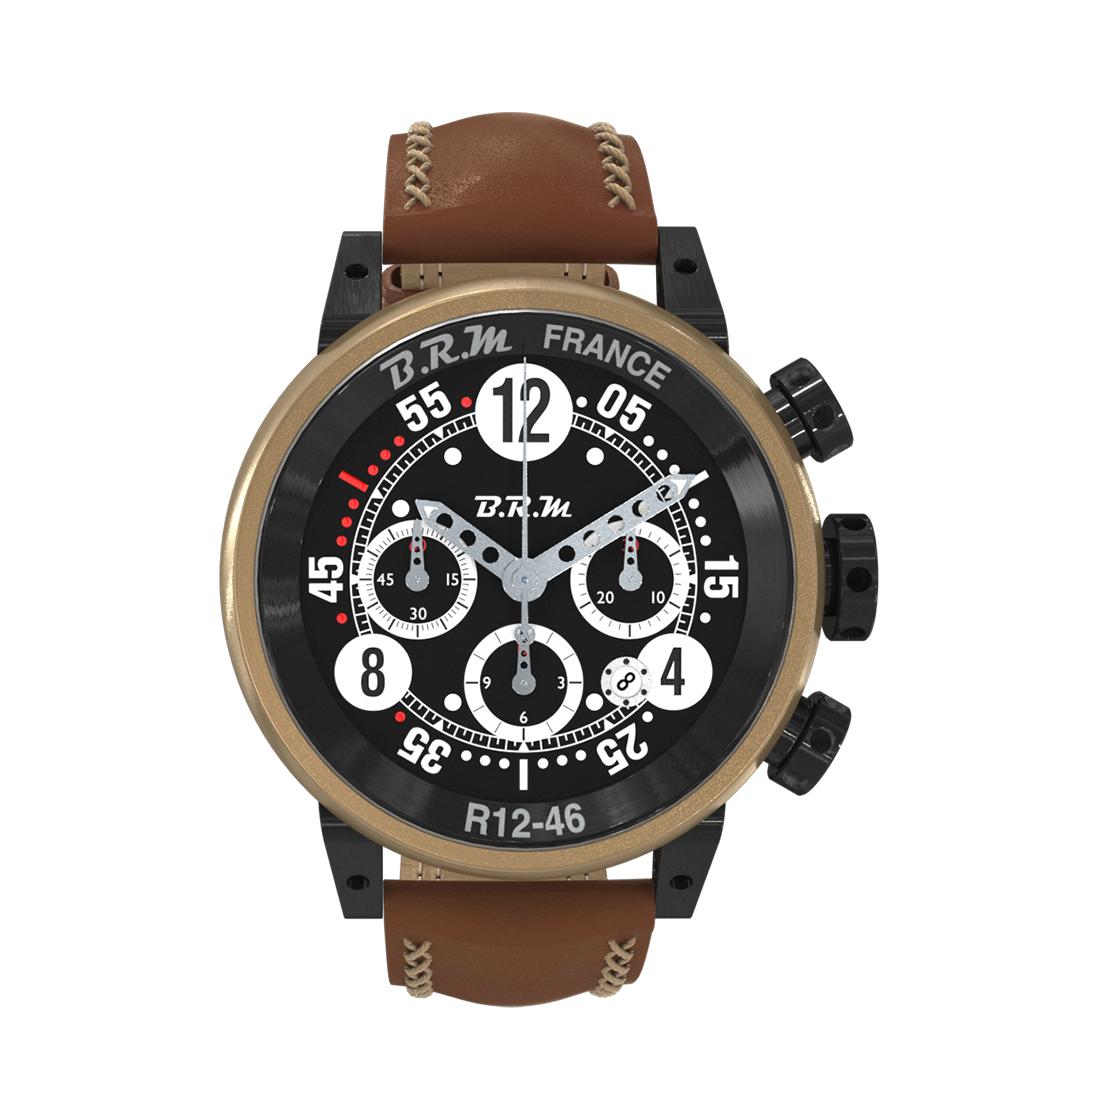 This R12-46-AG chronograph with bronze case and black PVD lugs, pushers and crown is the essential timepiece to complete your sporty chic look for this fall.
The 46 mm diameter case and the natural leather strap with cross stitching provide to this